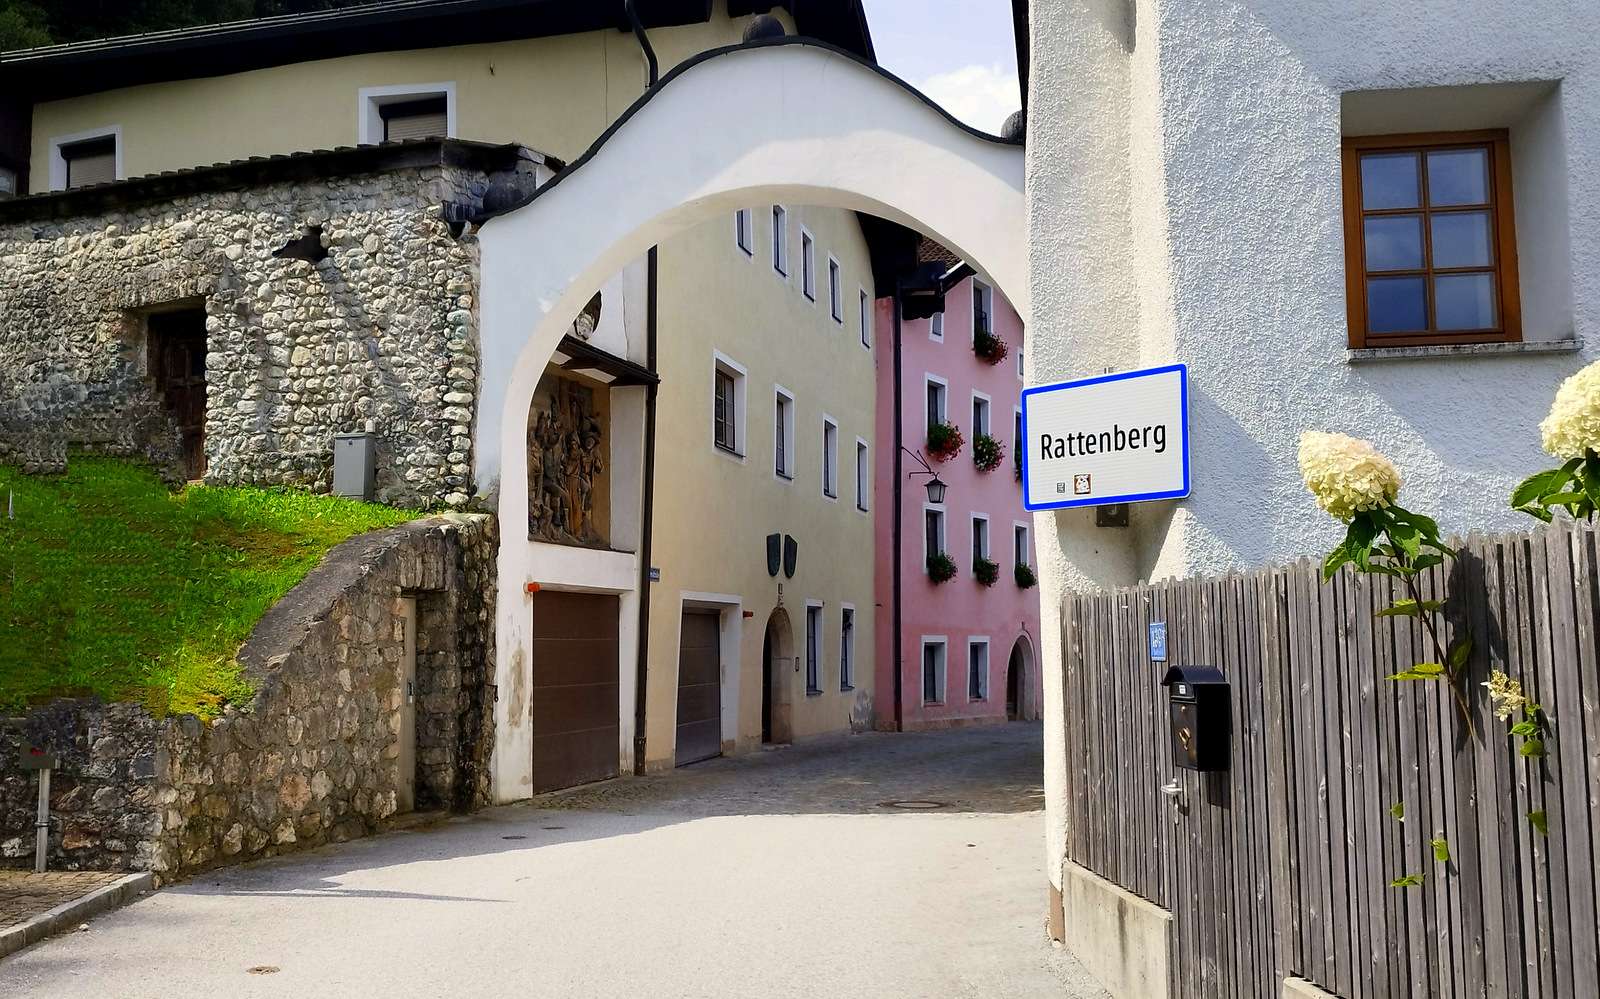 Rattenberg - the smallest city in Austria jigsaw puzzle online